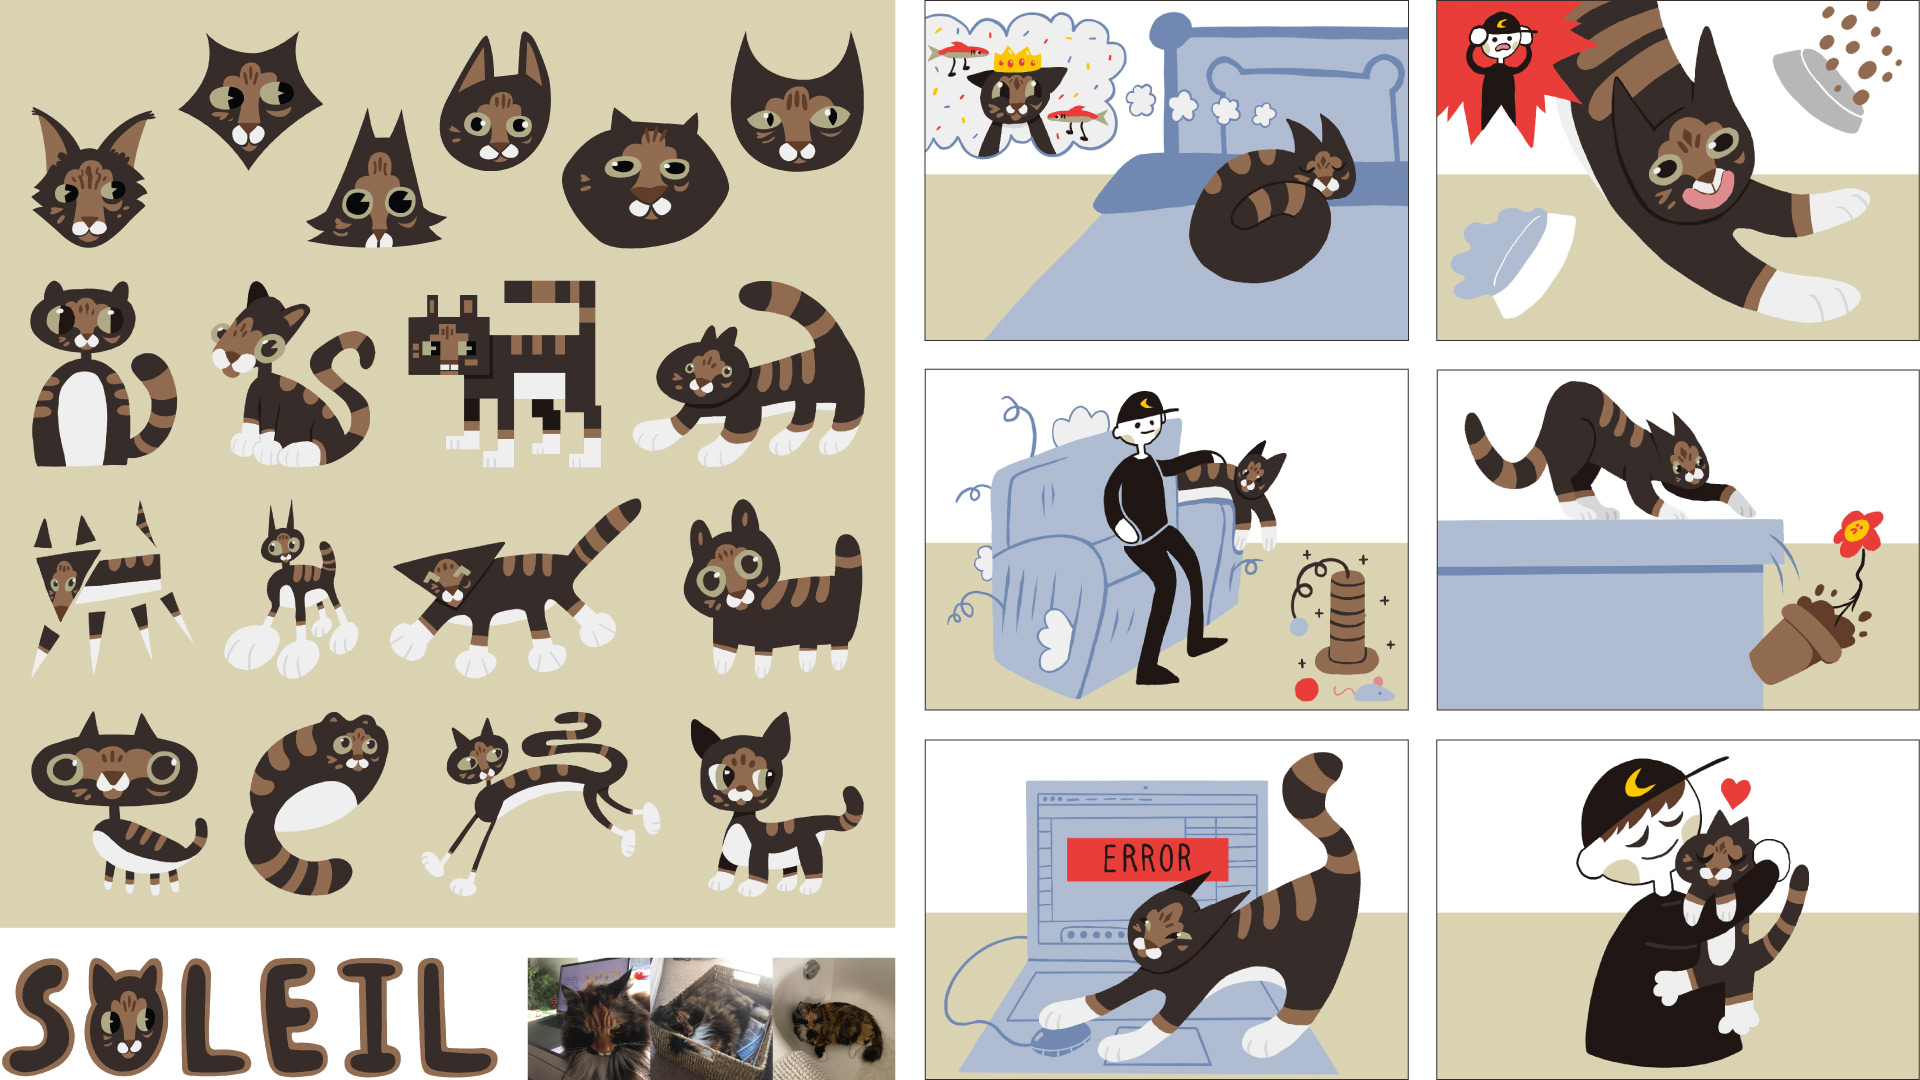 Cat comic with a collection of cat iterations and reference photos.